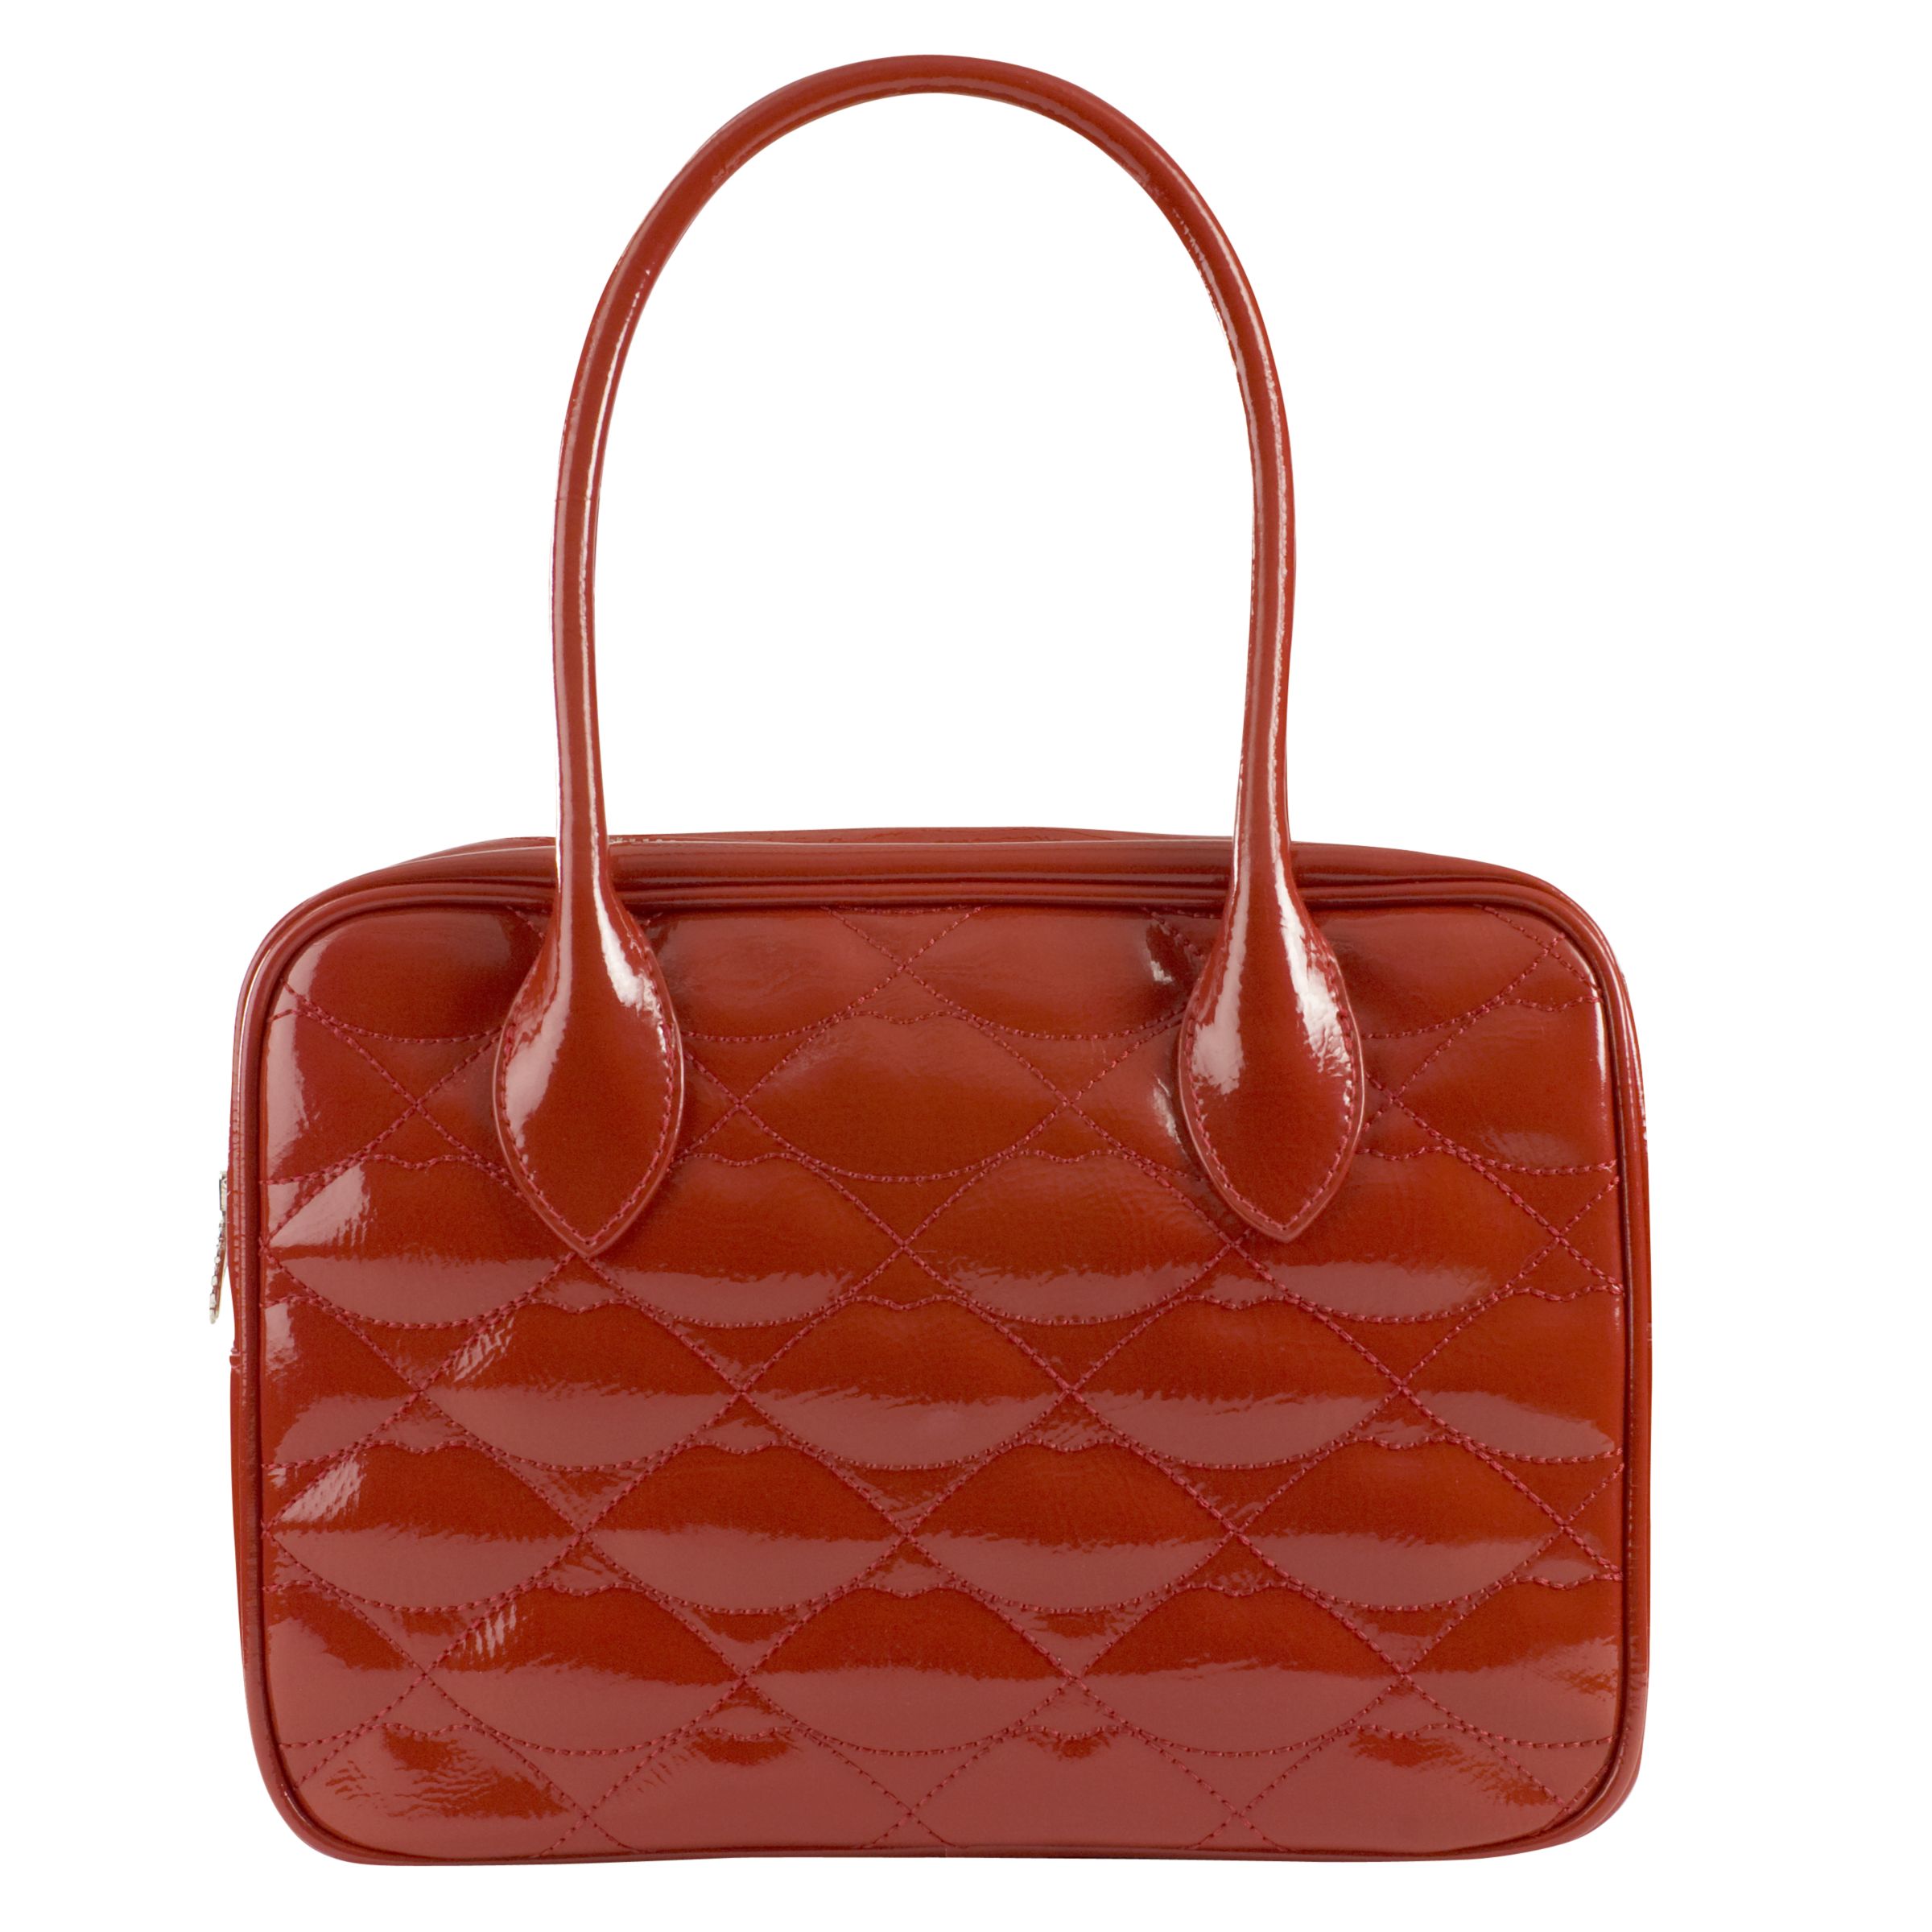 Lulu Guinness Jenny Quilted Lips Large Double Handle Shoulder Bag, Red at John Lewis